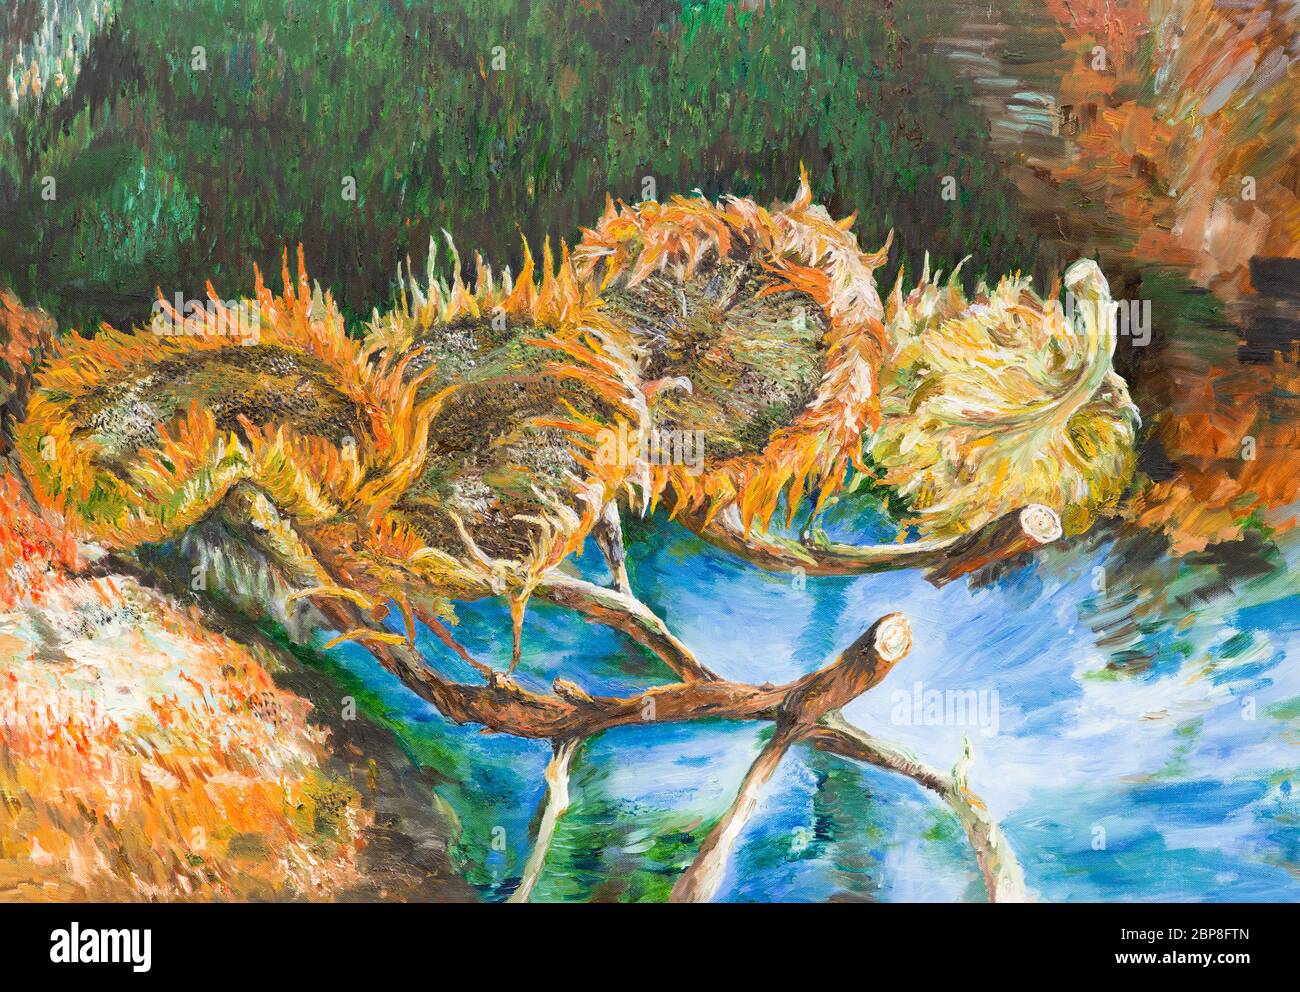 oil painting illustrating a replica of a famous painting made by Vincent van Gogh Stock Photo